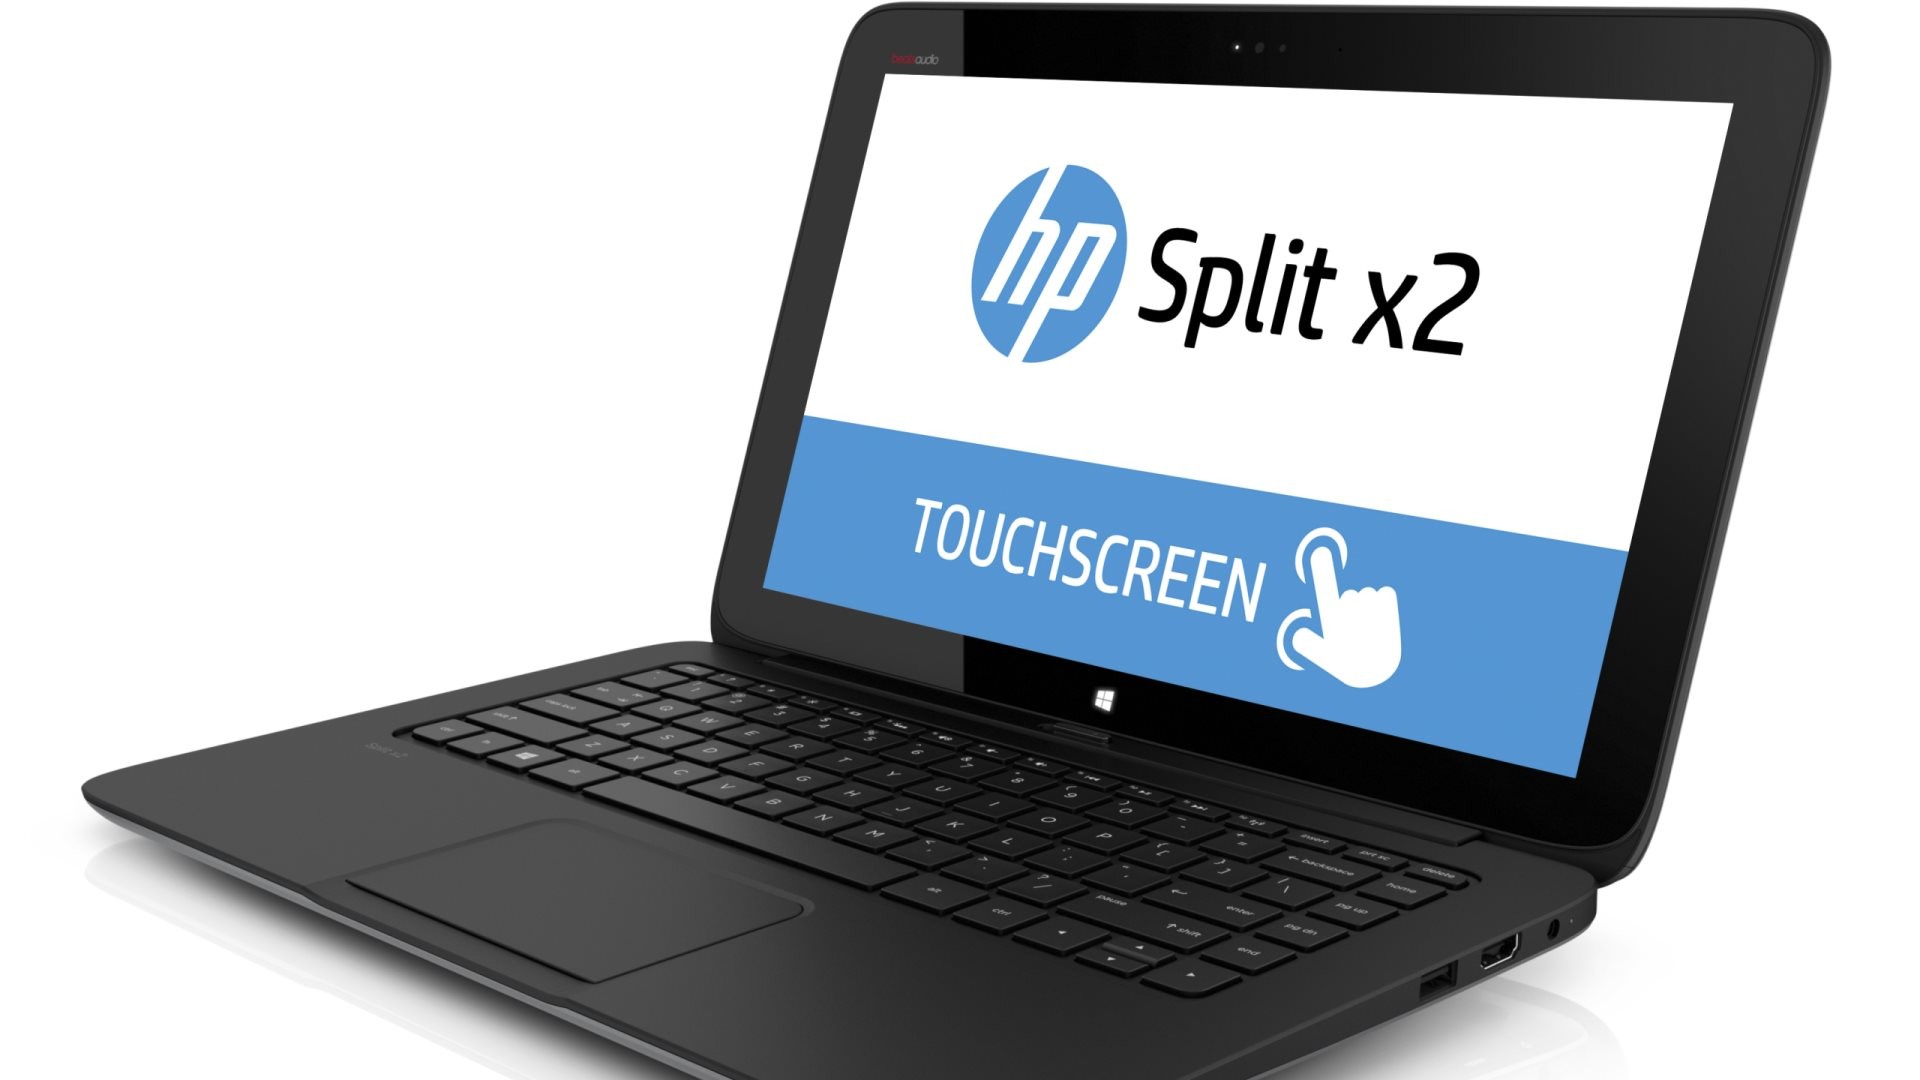 HD Wallpaper: Hewlett-Packard Split x2 tablet notebook has a 2-in-1 design  to easily go from a powerful notebook to a portable tablet